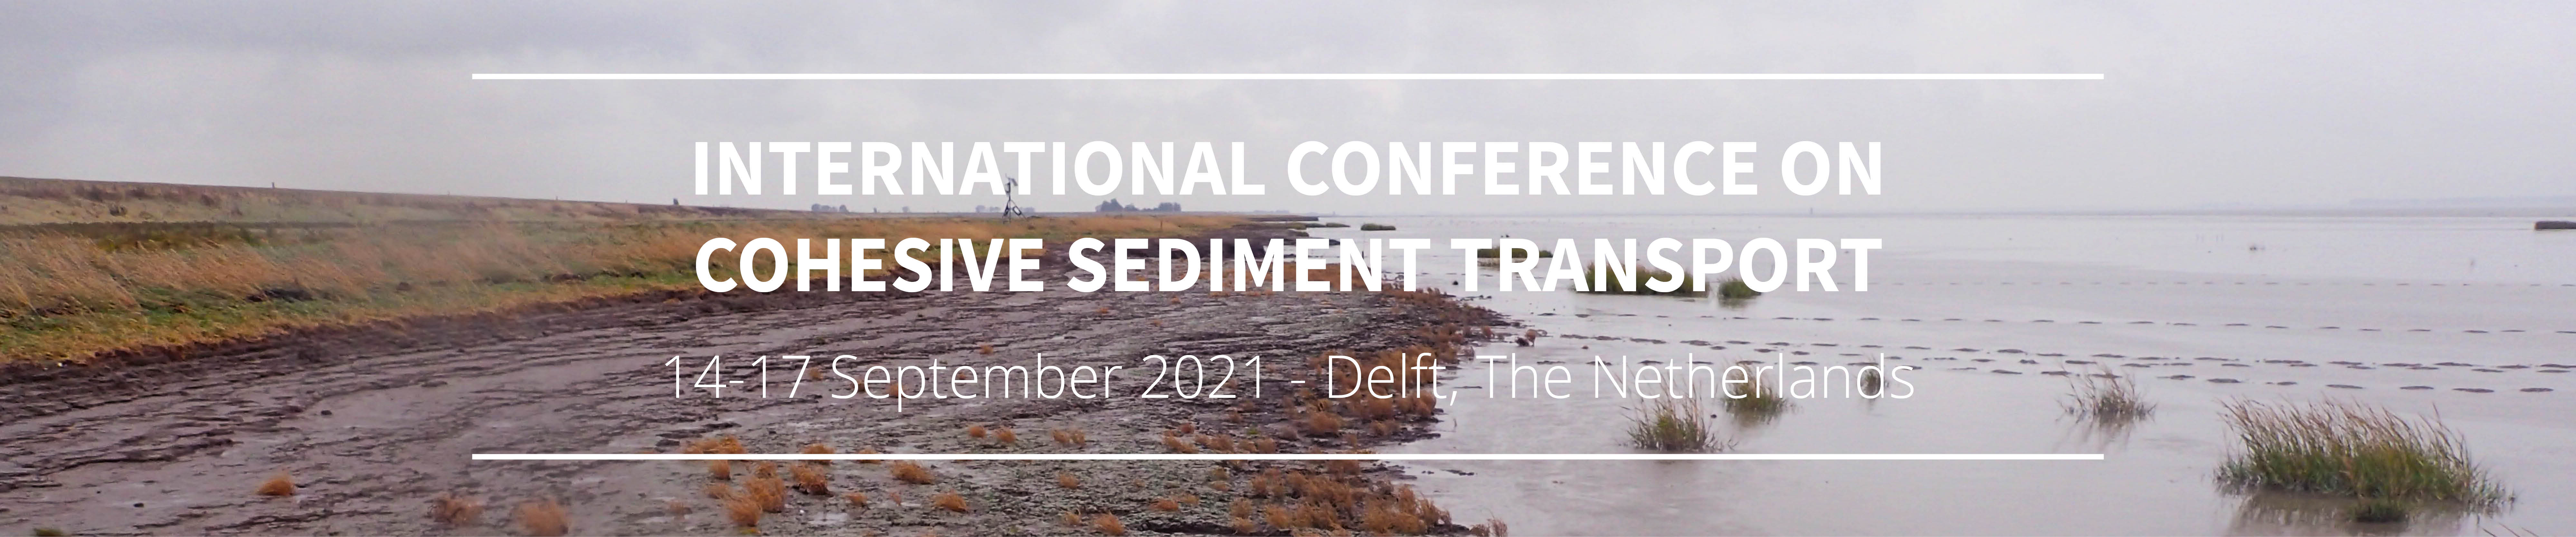 International Conference on Cohesive Sediments